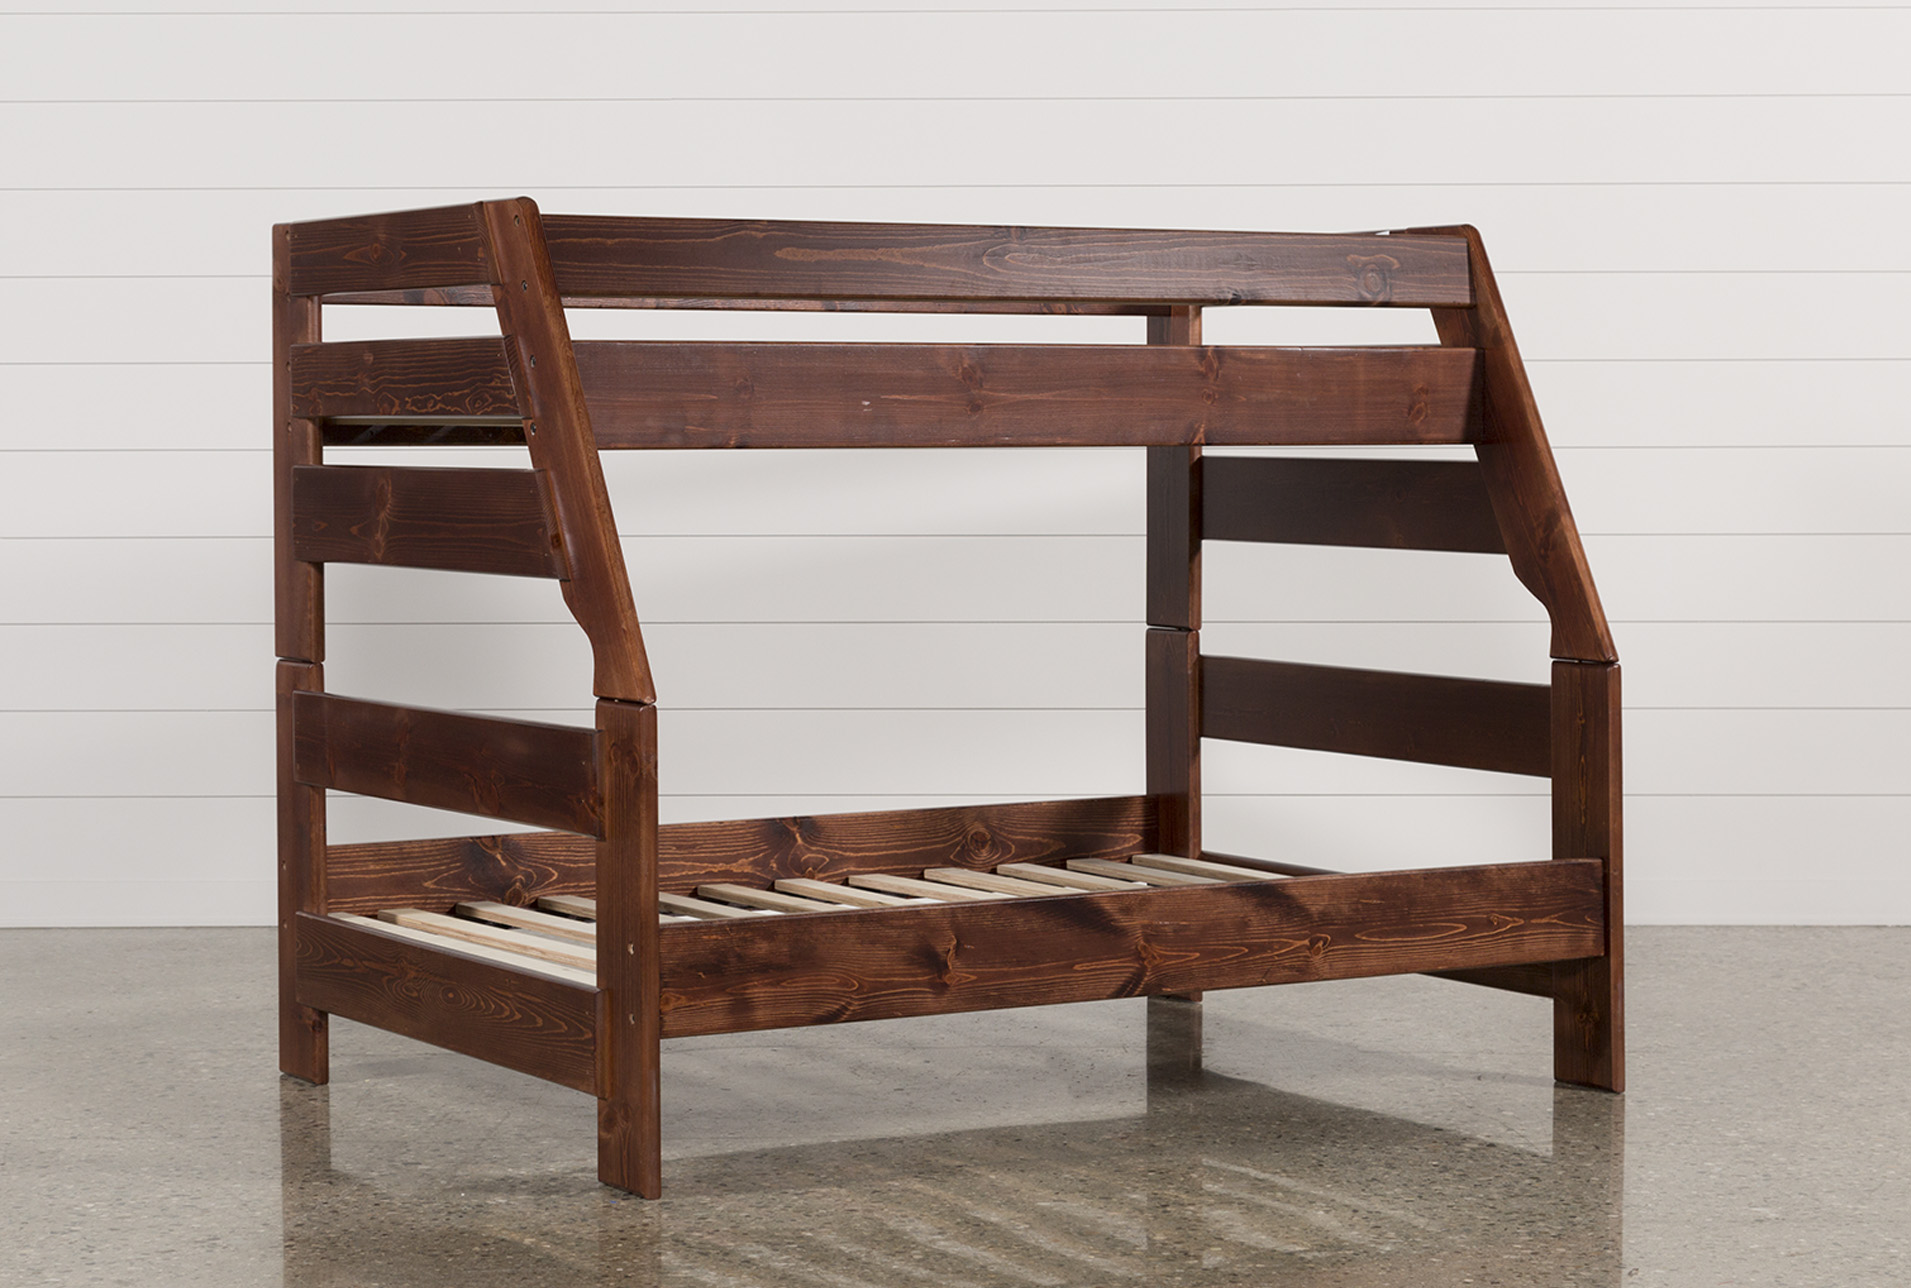 wood bunk beds twin over full